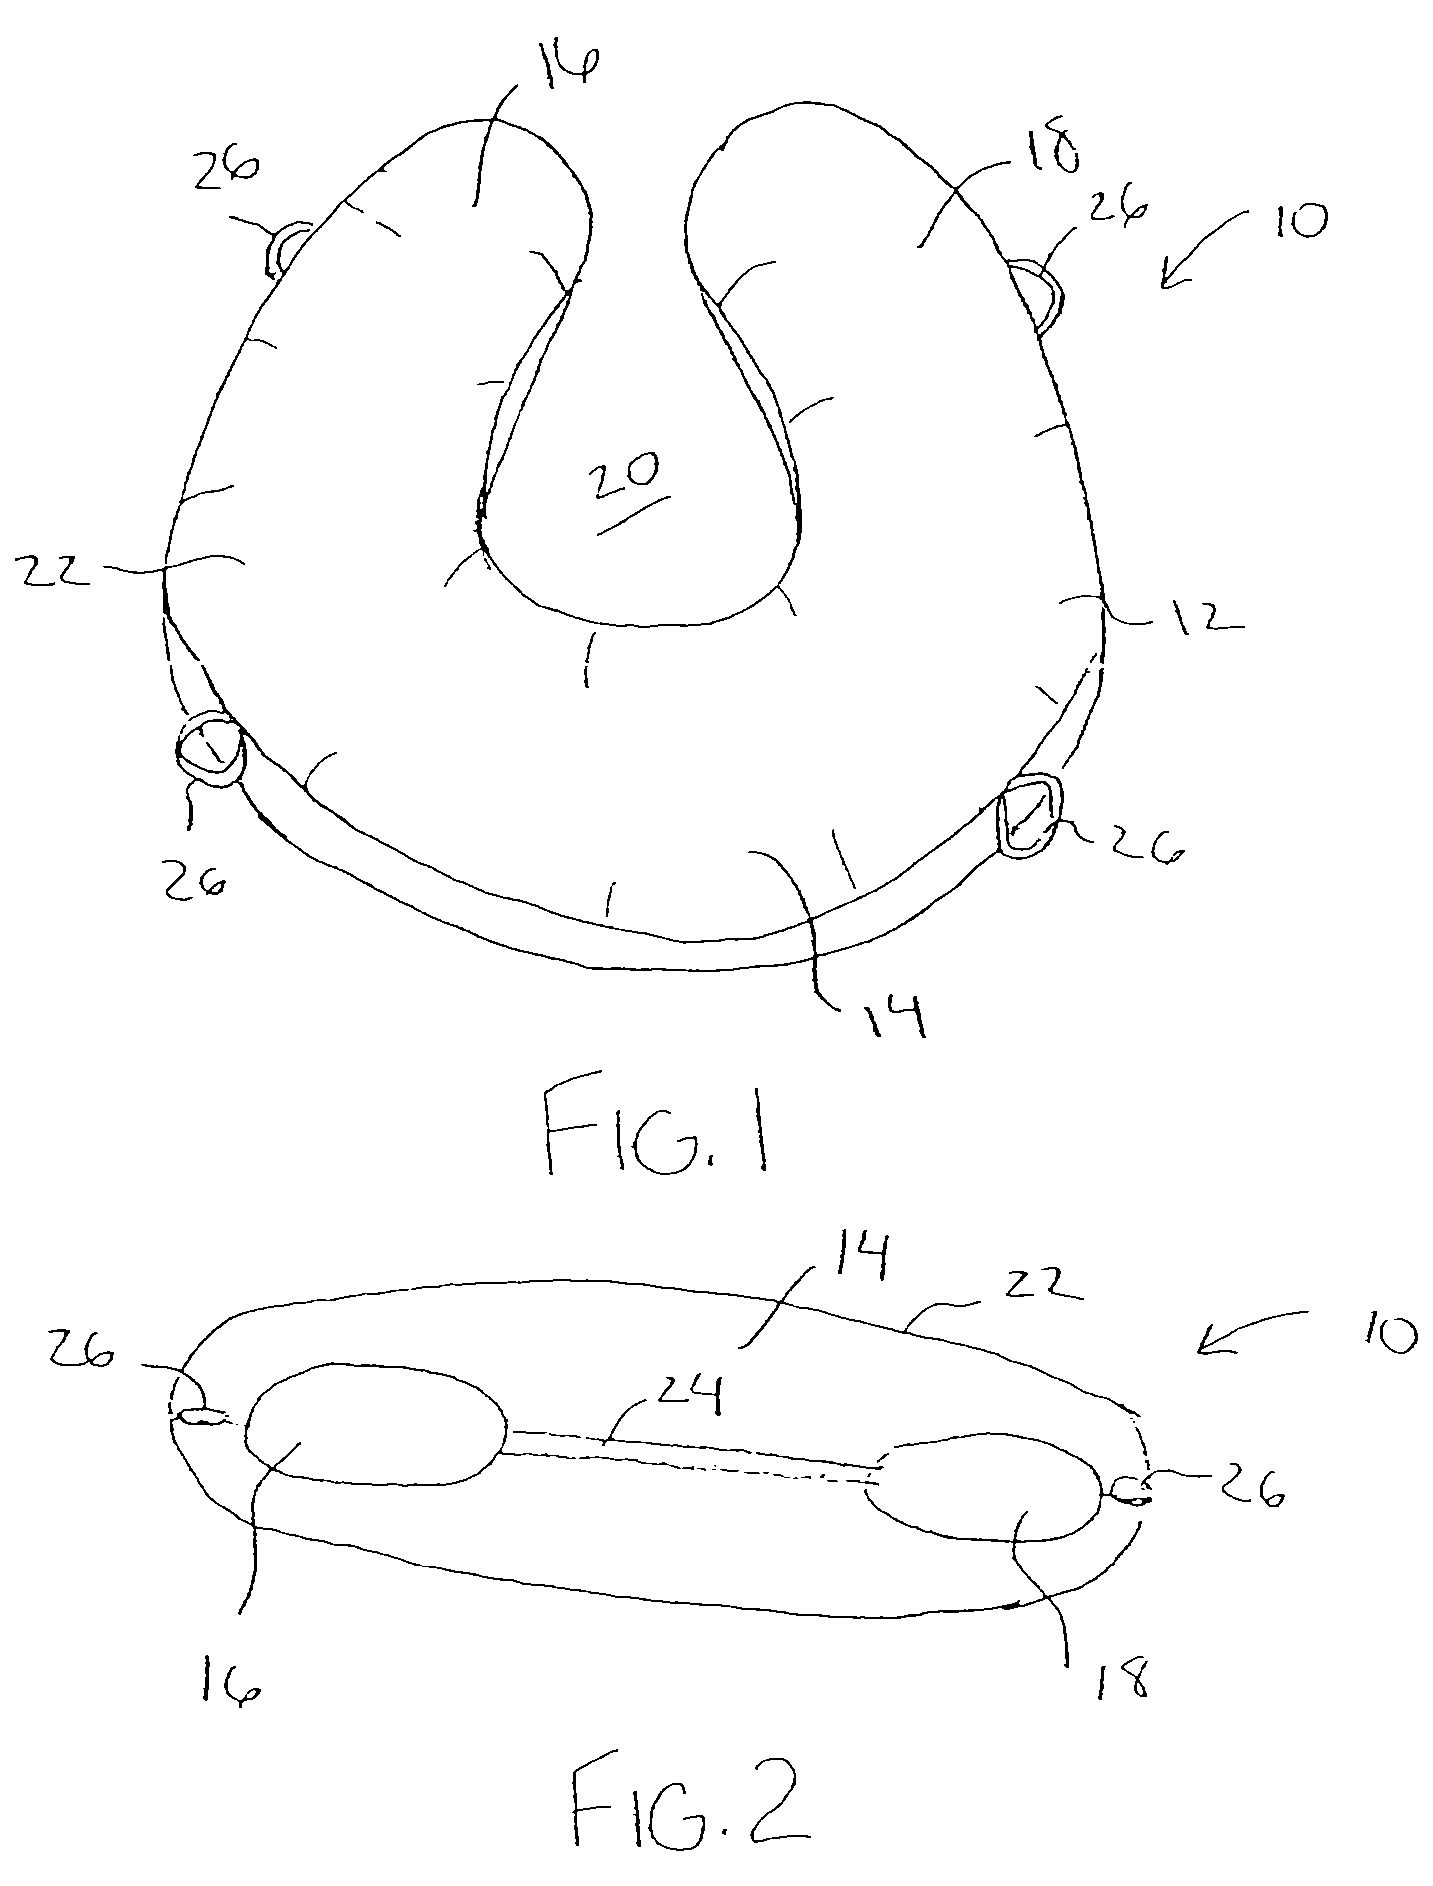 Support pillow and cover with mat and methods for using